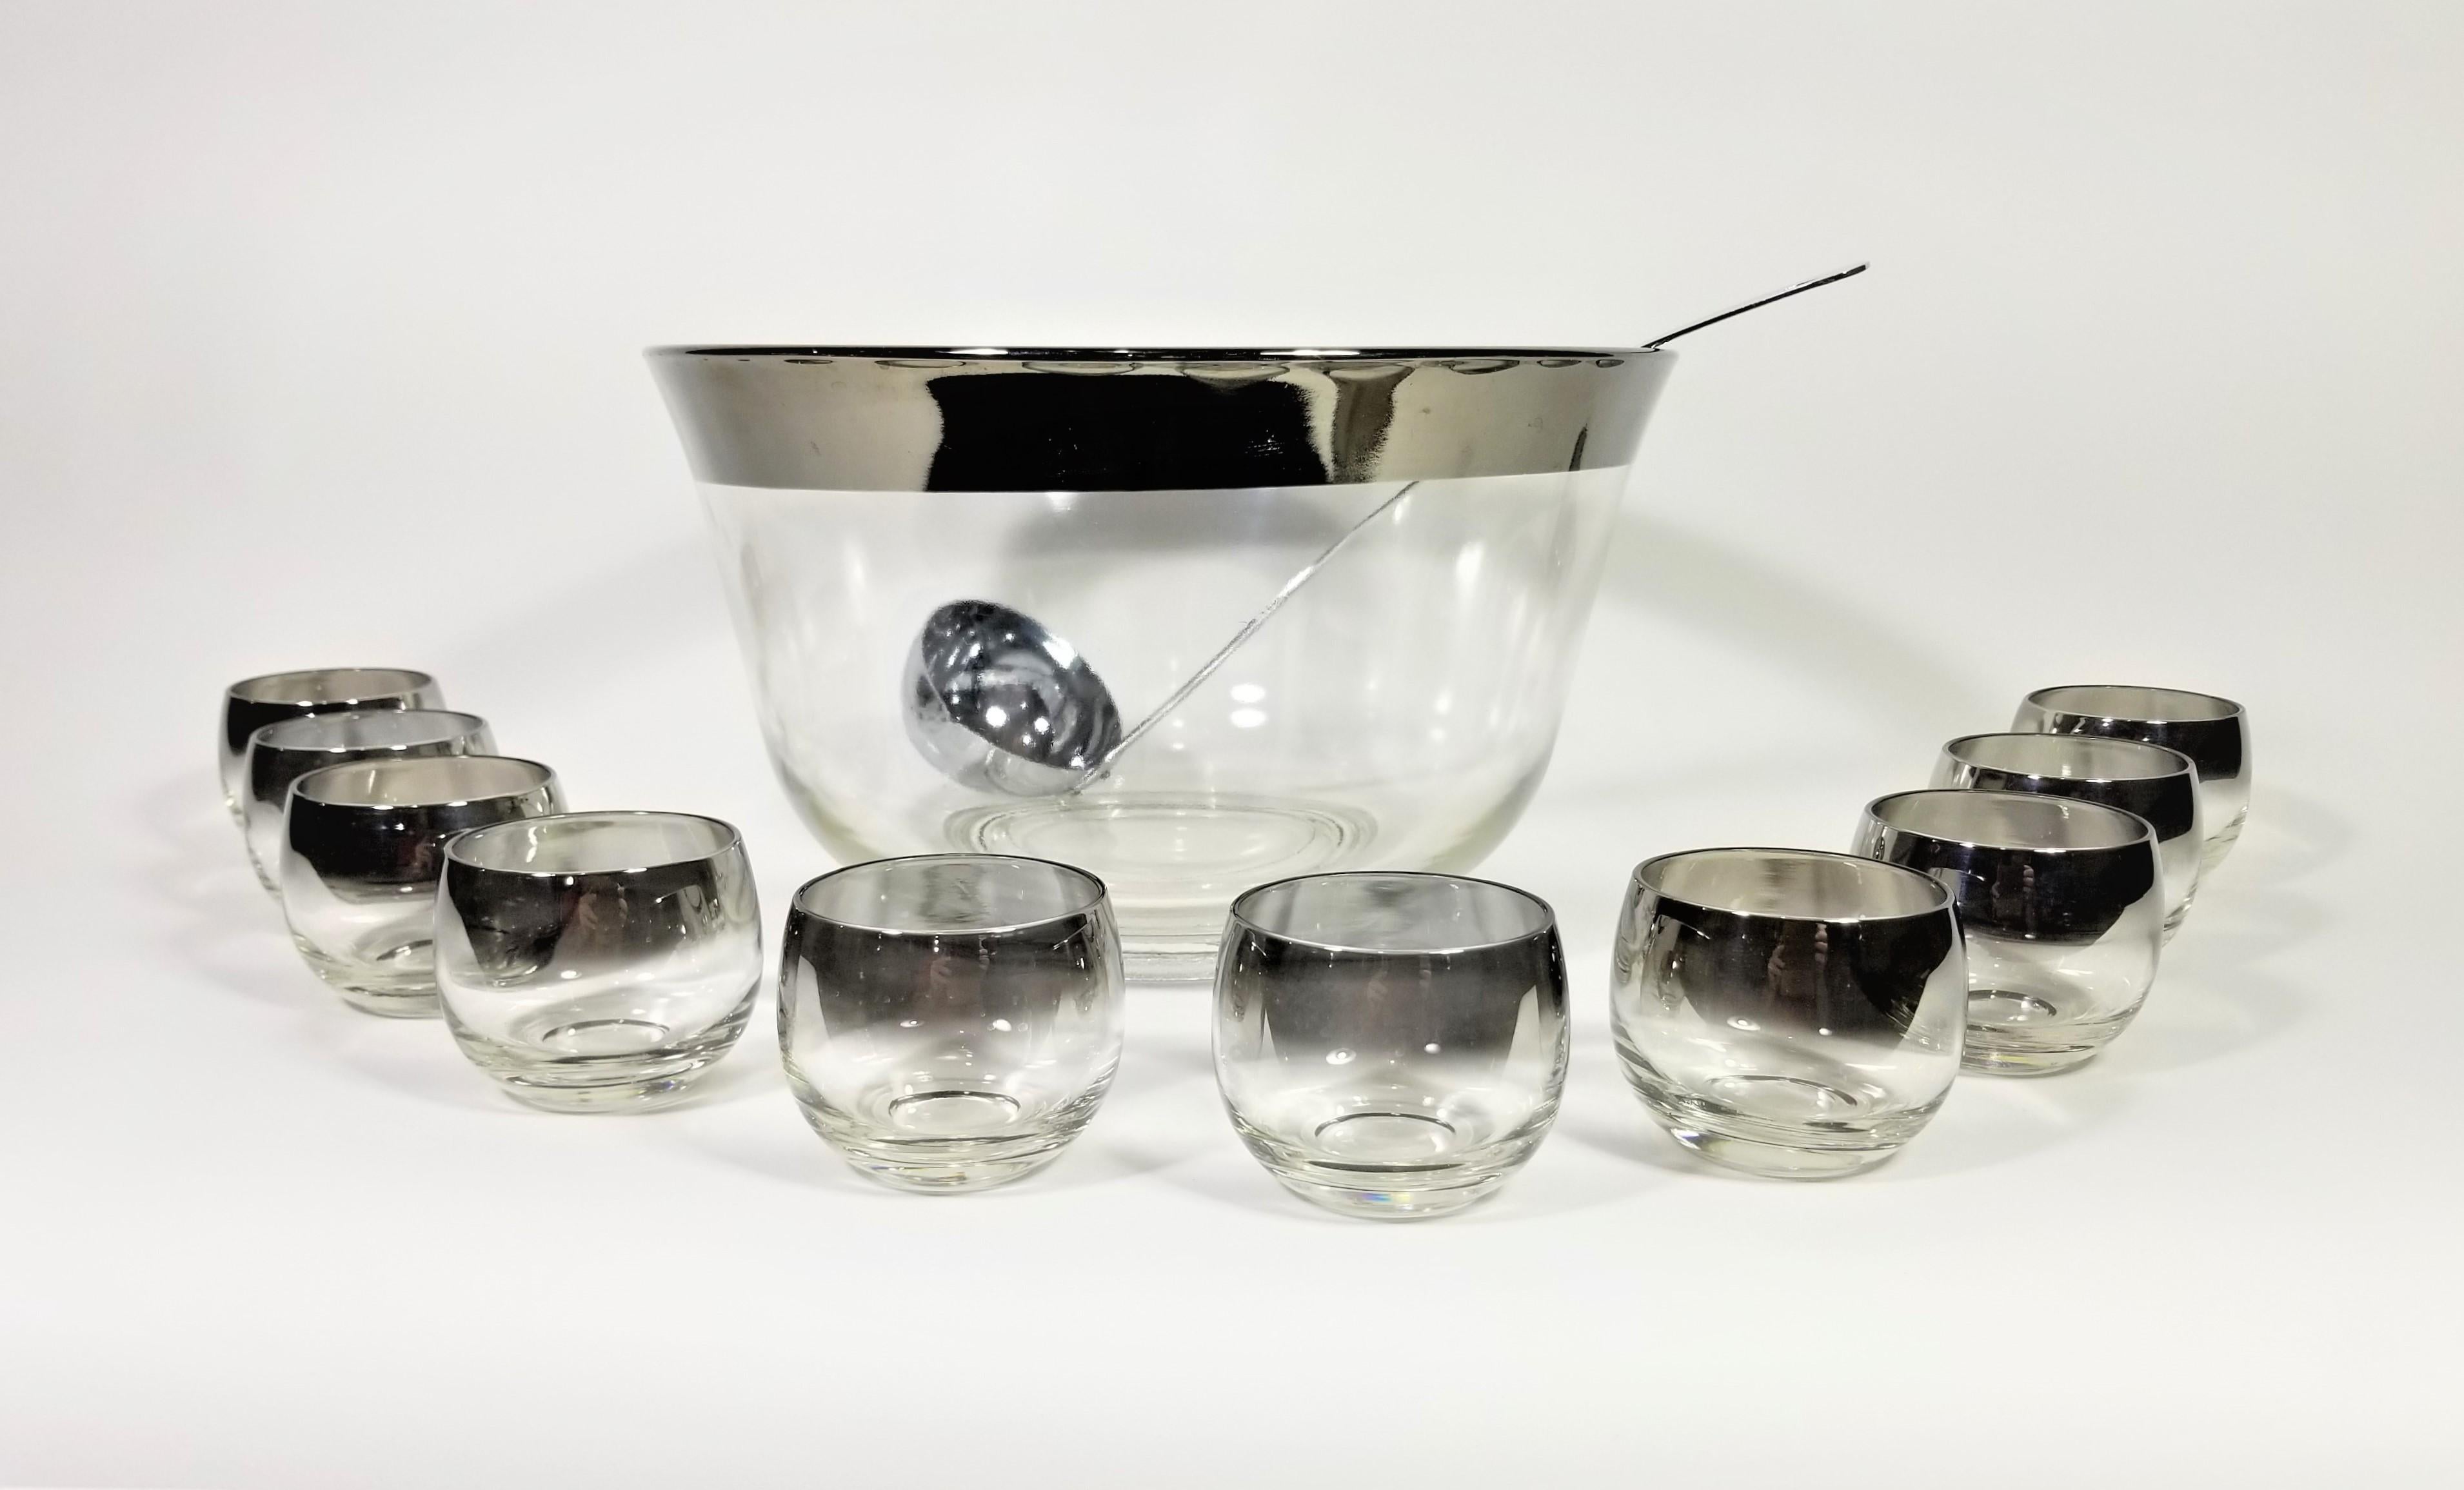 Mid Century 1960s Dorothy Thorpe Glassware Barware. Punch Bowl Set. 12 piece includes 1 large bowl with ladle and 10 glasses. Glasses are often referred to as roly poly glasses due to their round modern shape.

Punch Bowl Height: 6.5 inches
Punch